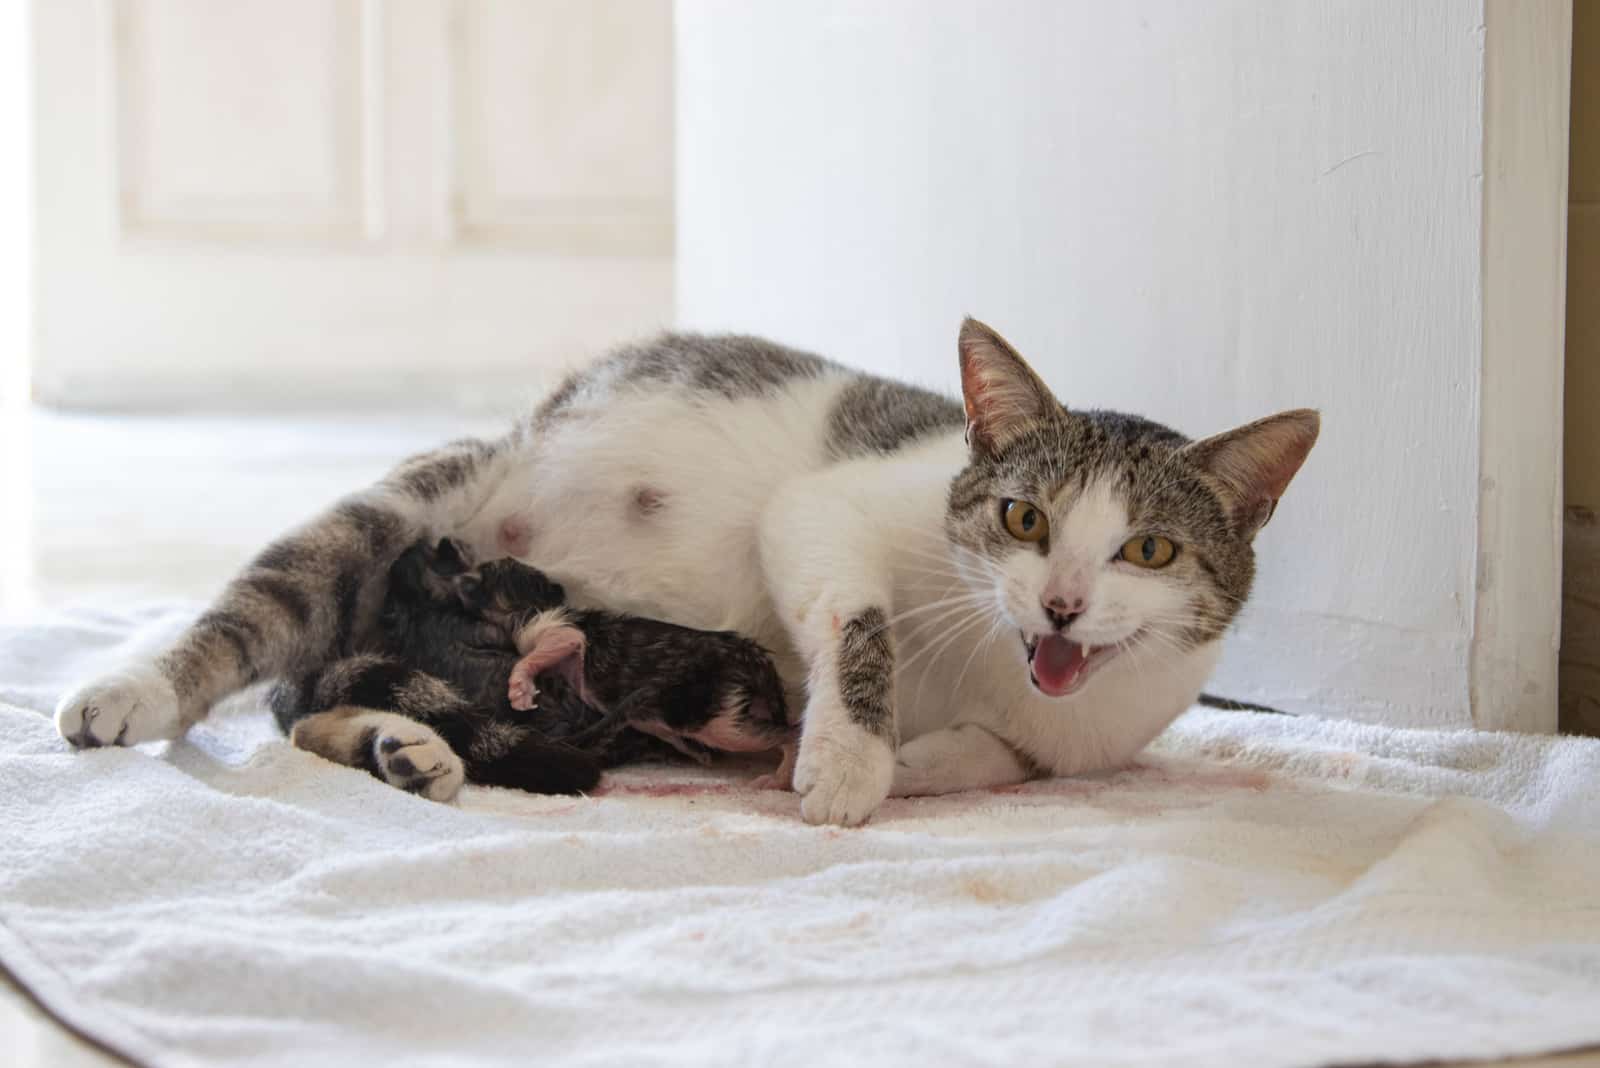 Tabby and white cat in labour while her first newborn